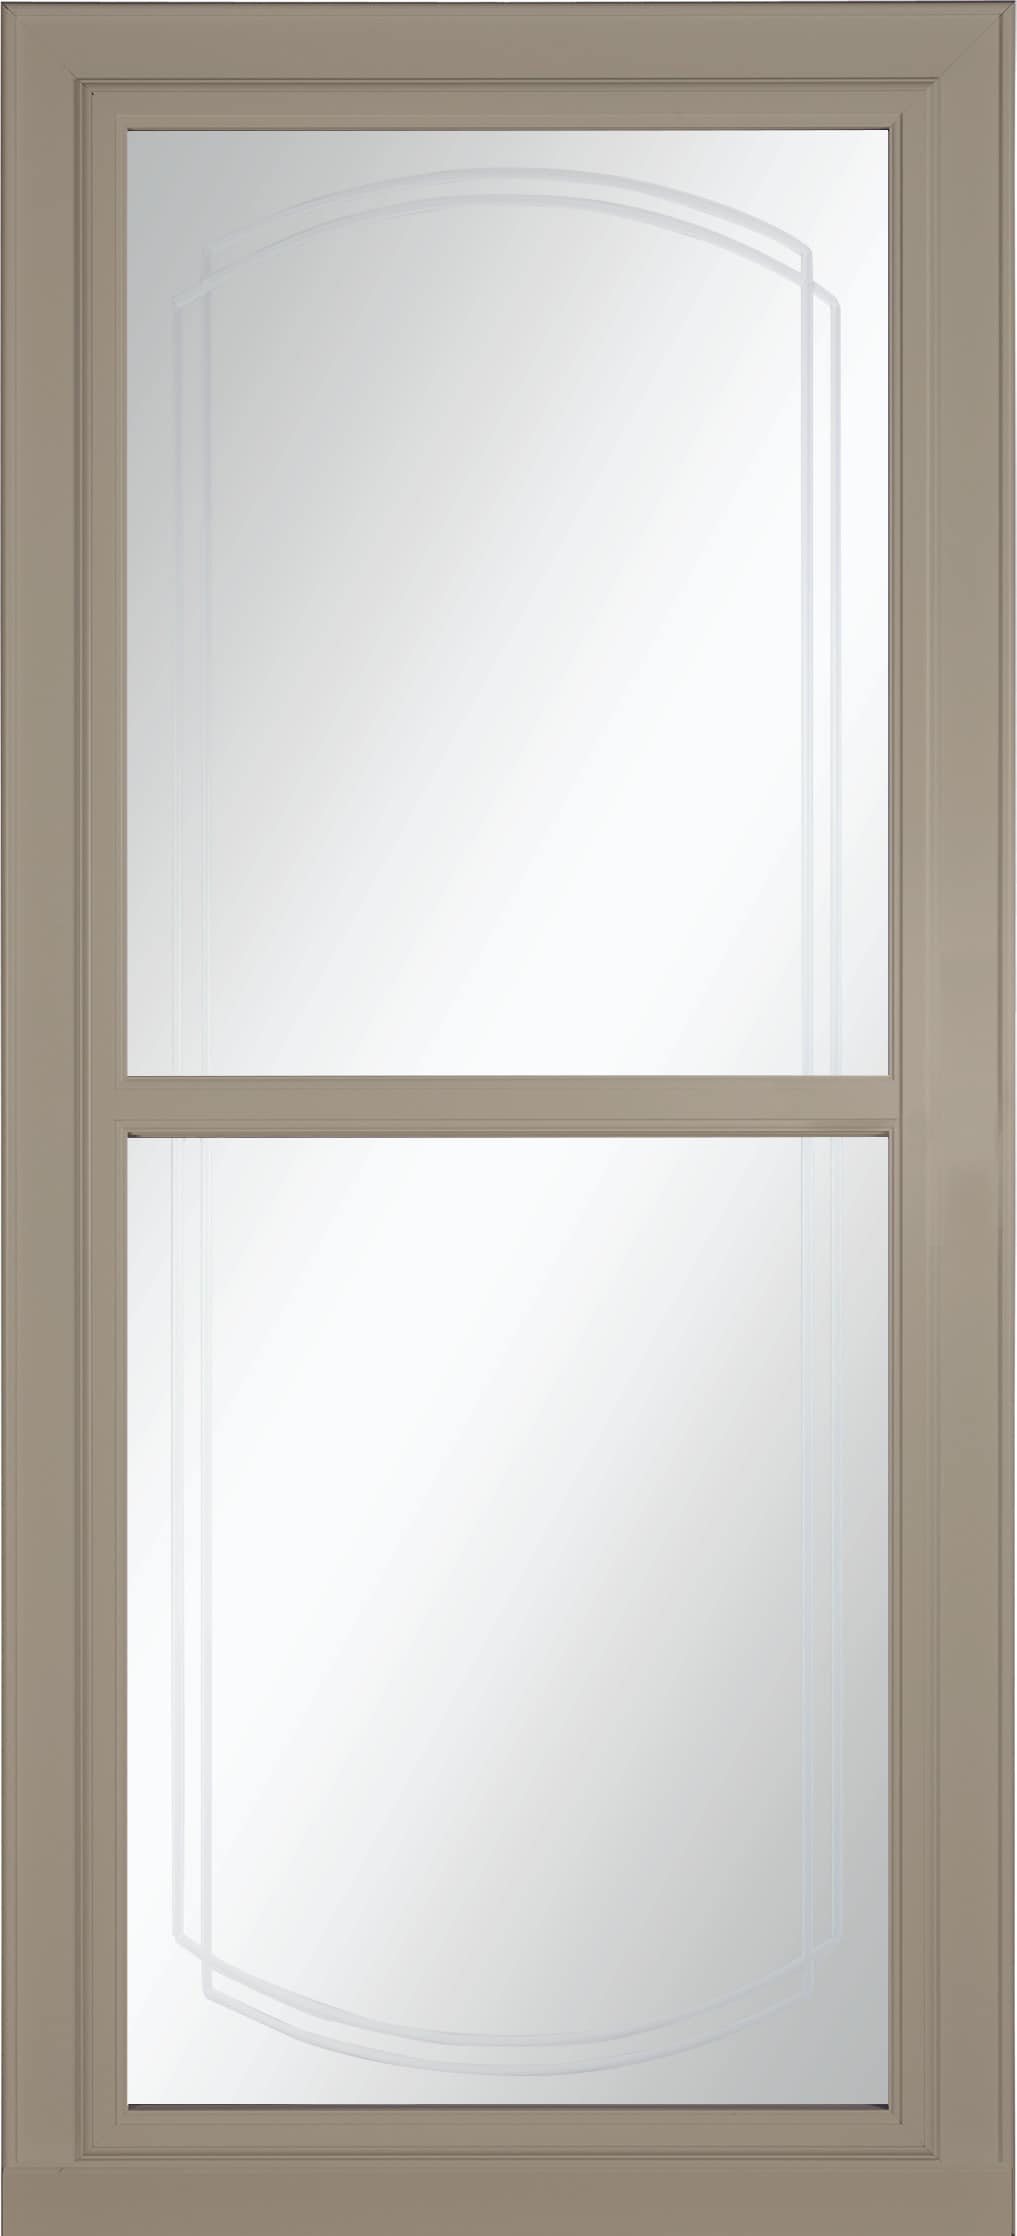 LARSON Tradewinds Selection 36-in x 81-in White Full-view